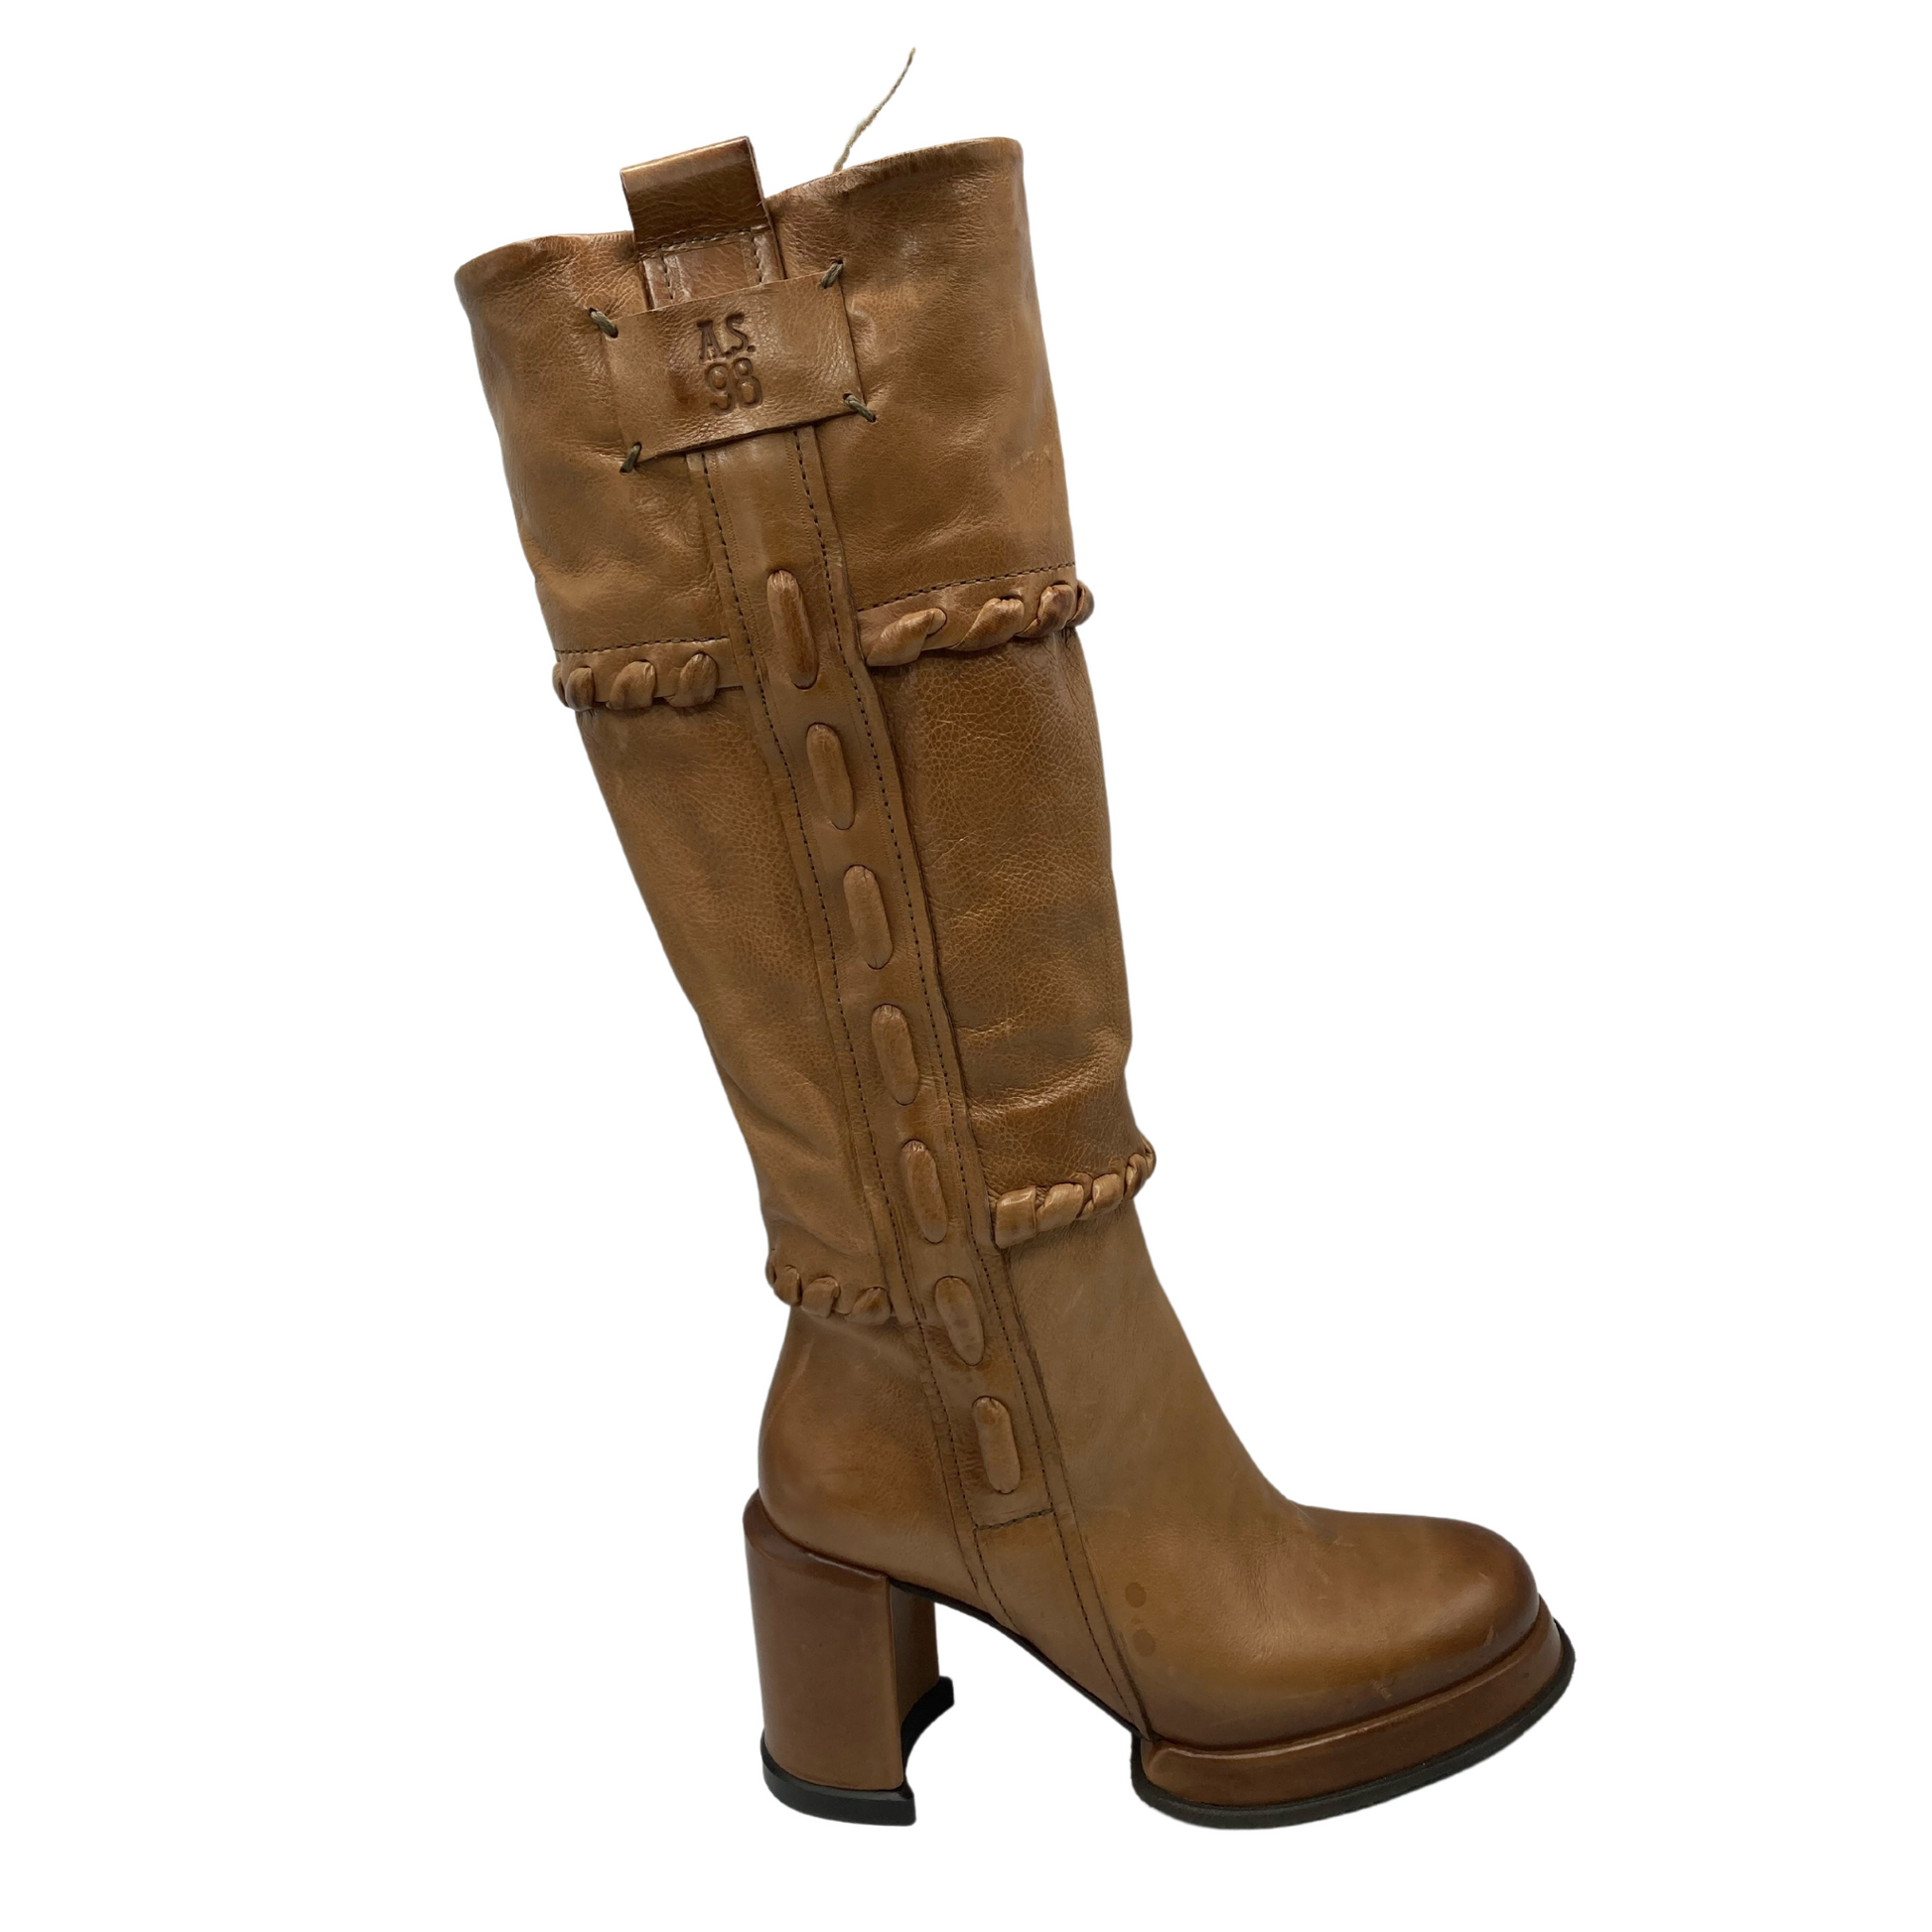 Right facing view of brown leather knee high boots with rounded toe and block heel